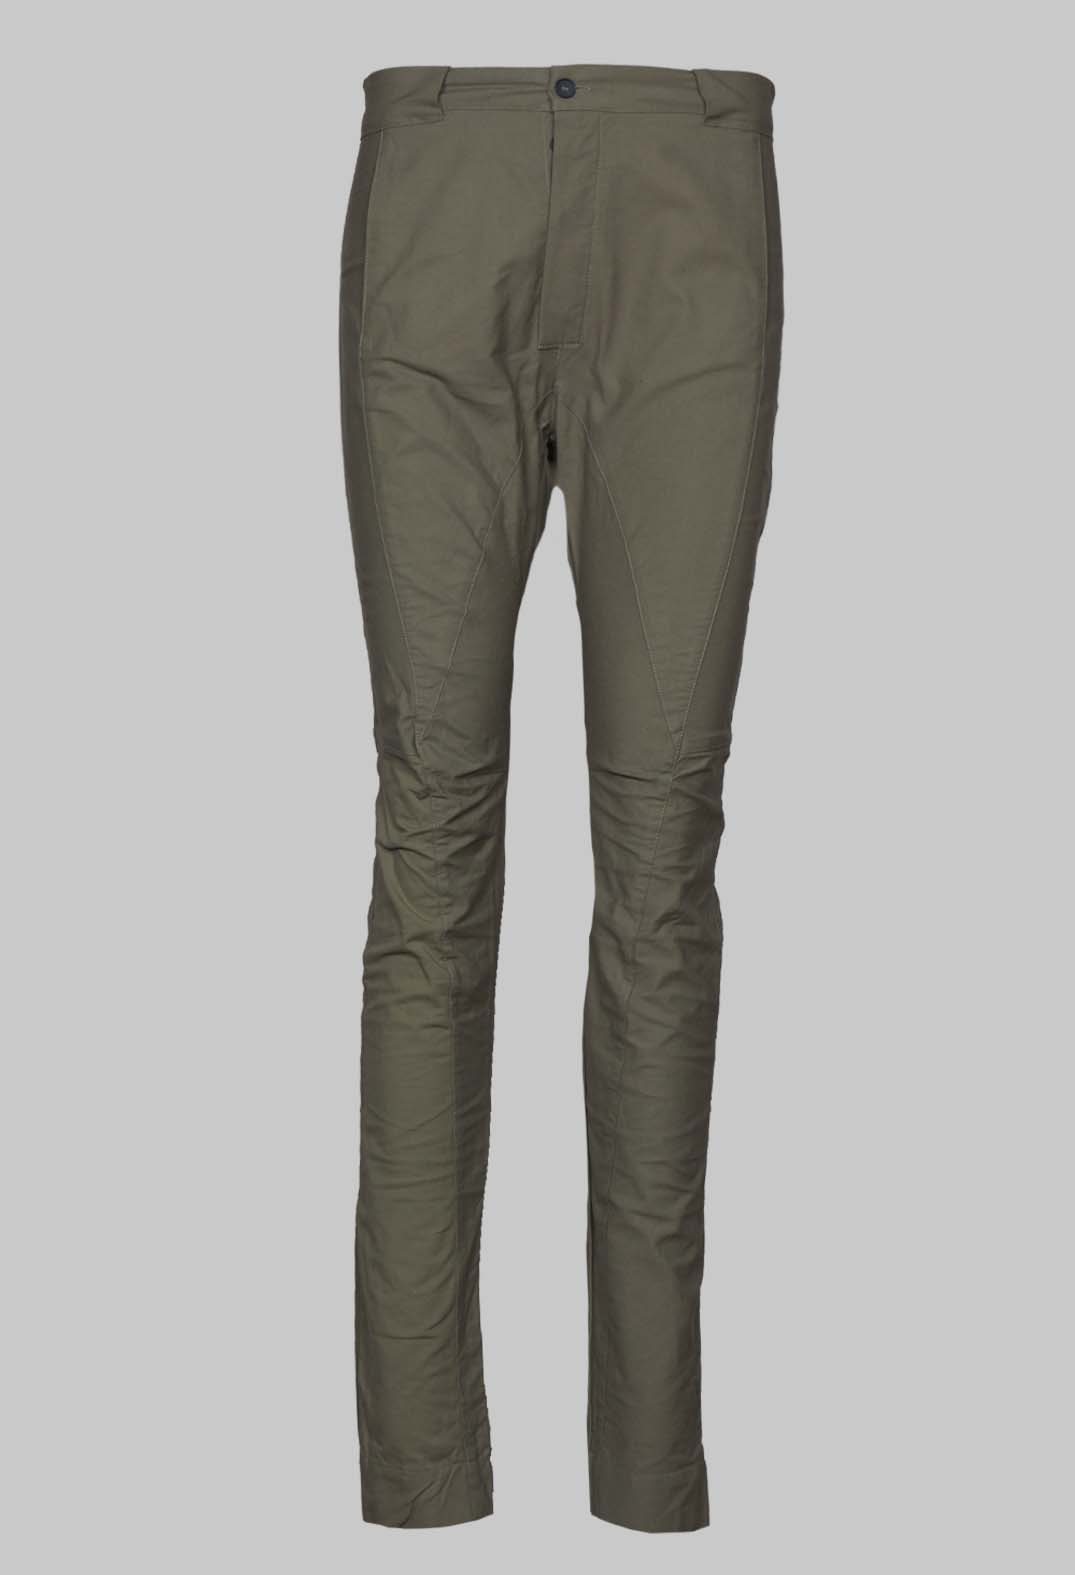 Donoma Trousers in Argil